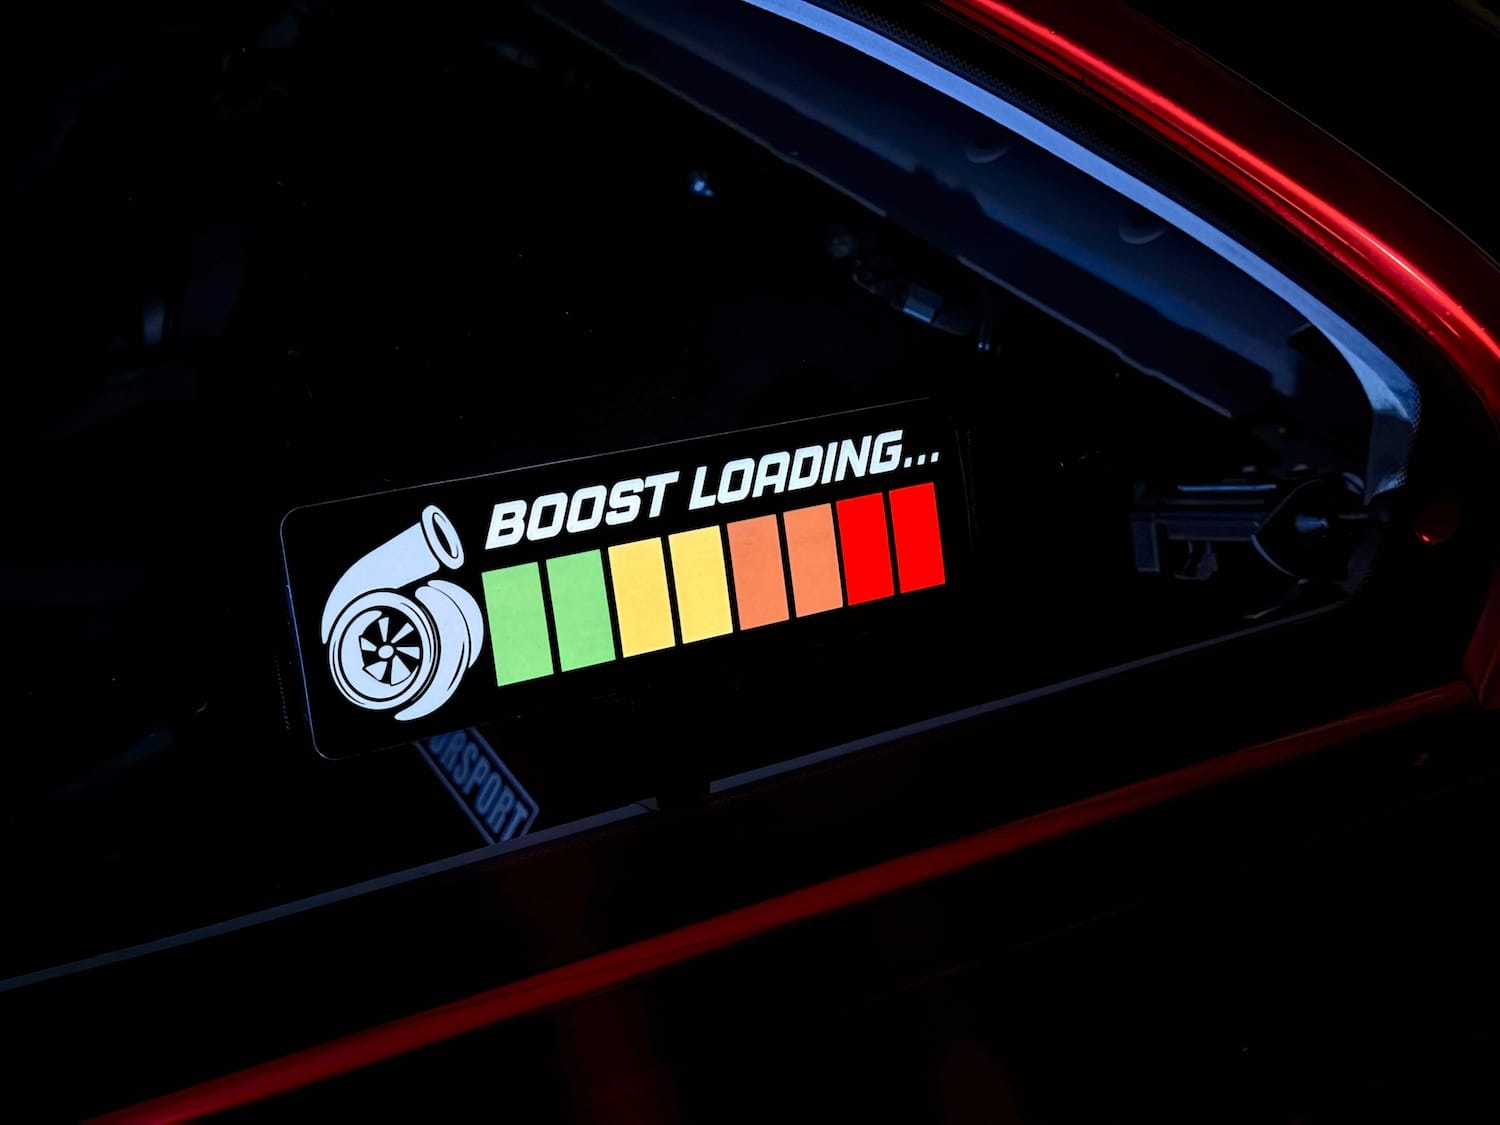 Turbo Boost Loading - v2.5 USB Rechargeable - Illuminated Adhesive Decal